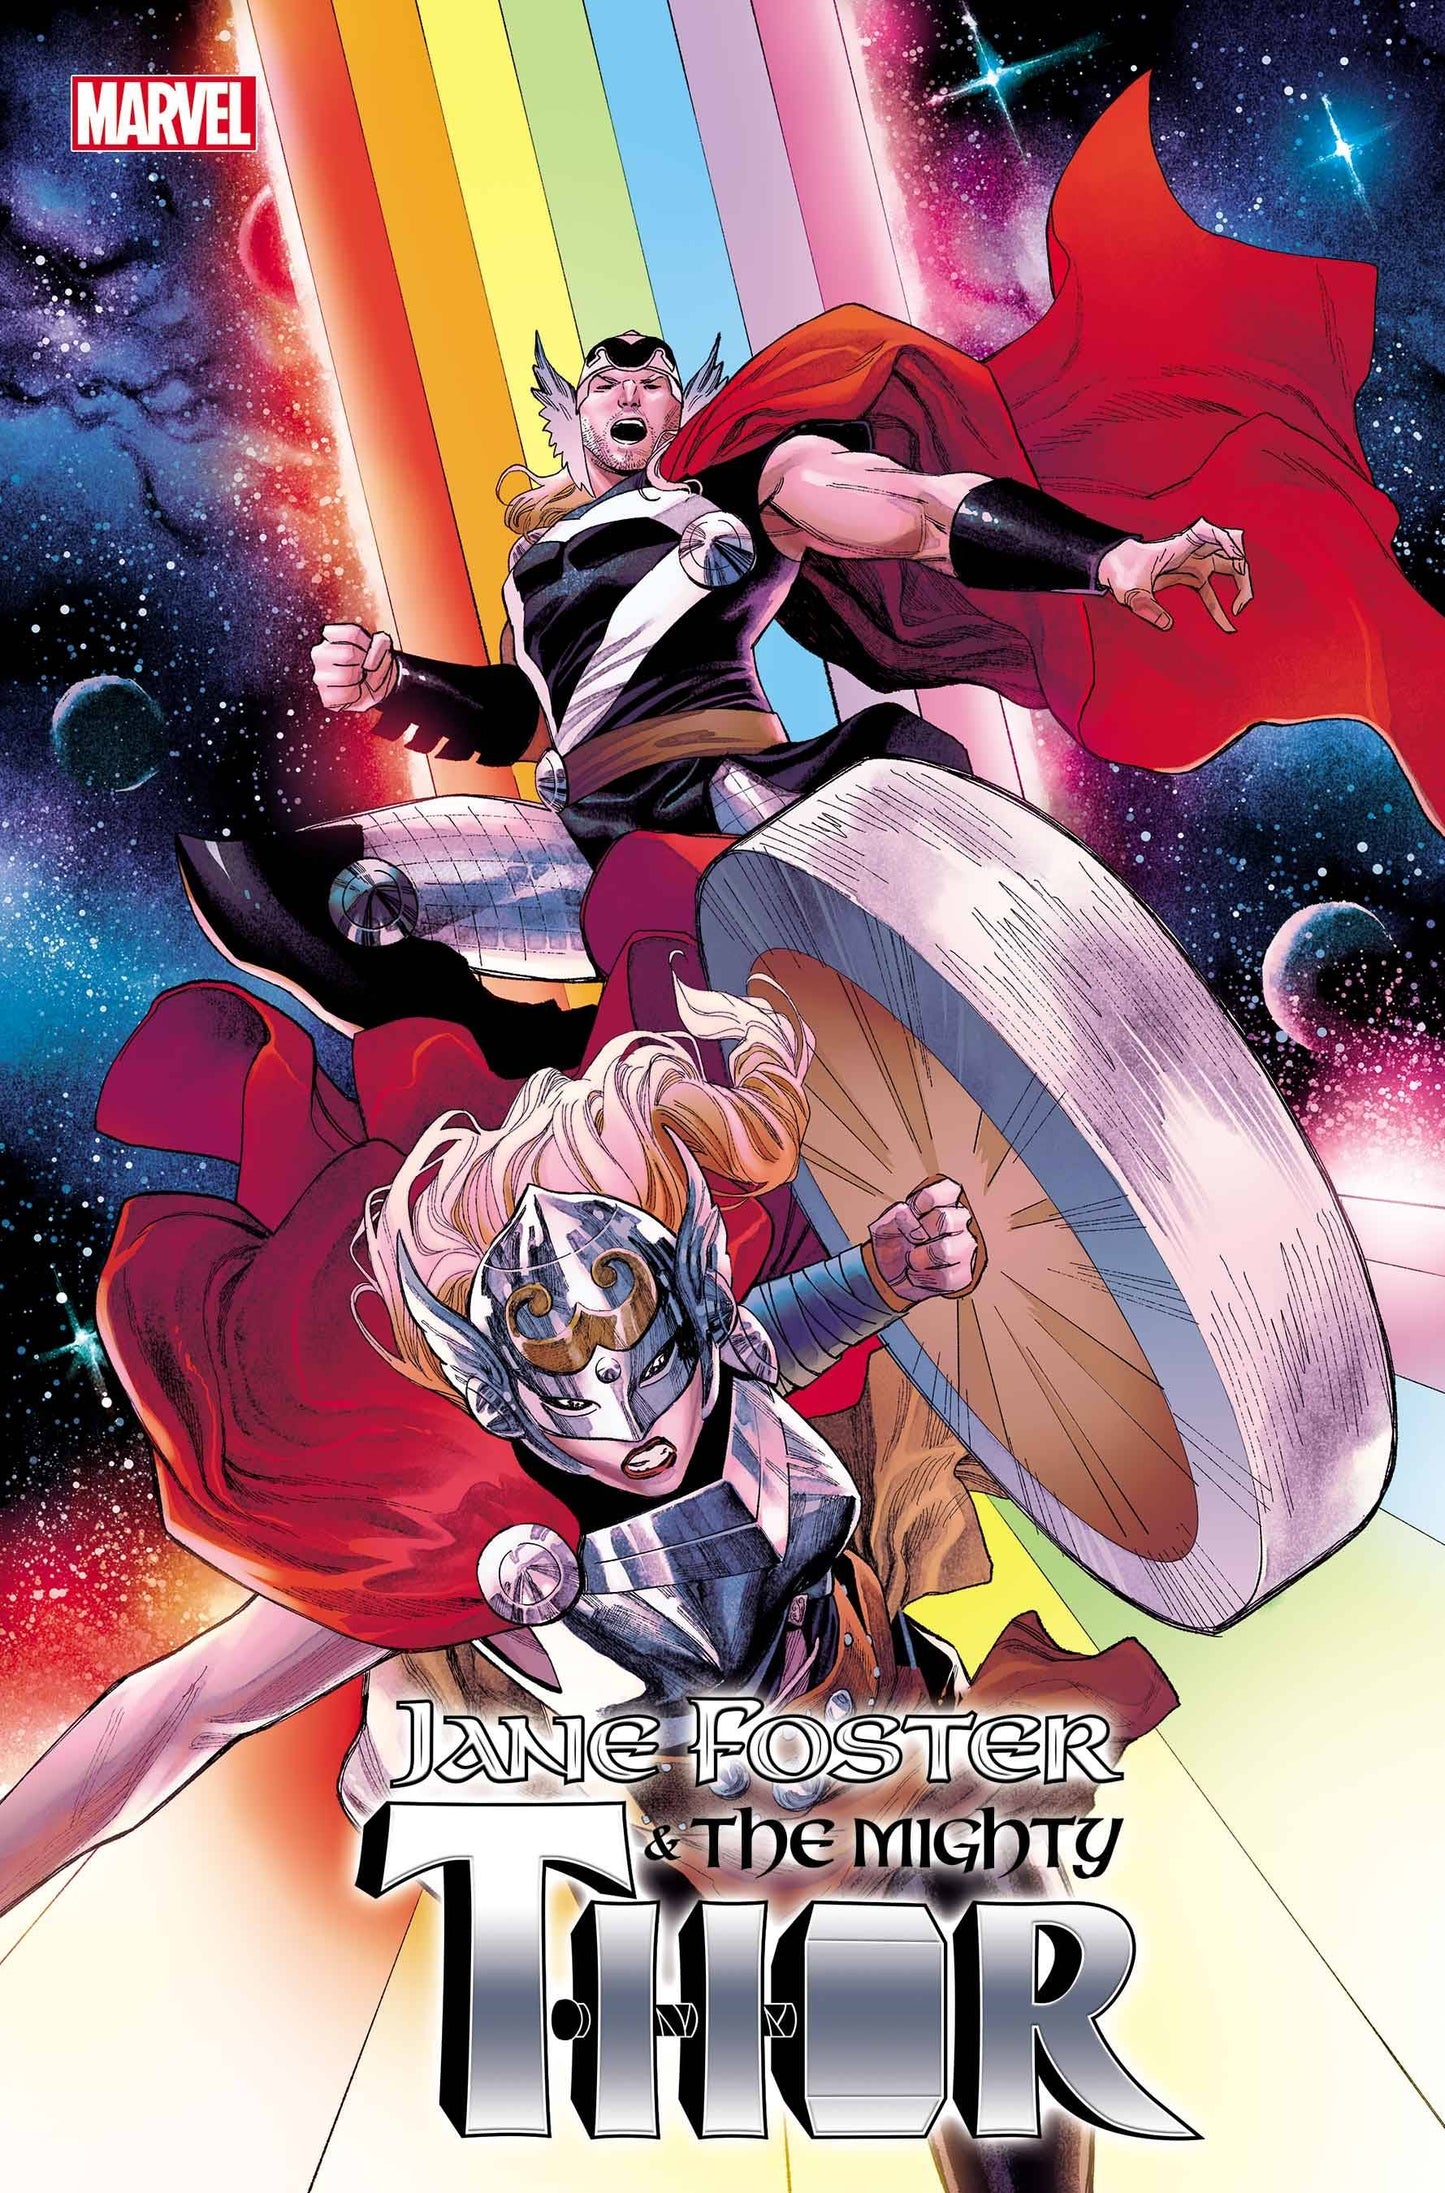 JANE FOSTER MIGHTY THOR #1 (OF 5) COCCOLO 1:25 VARIANT 2022